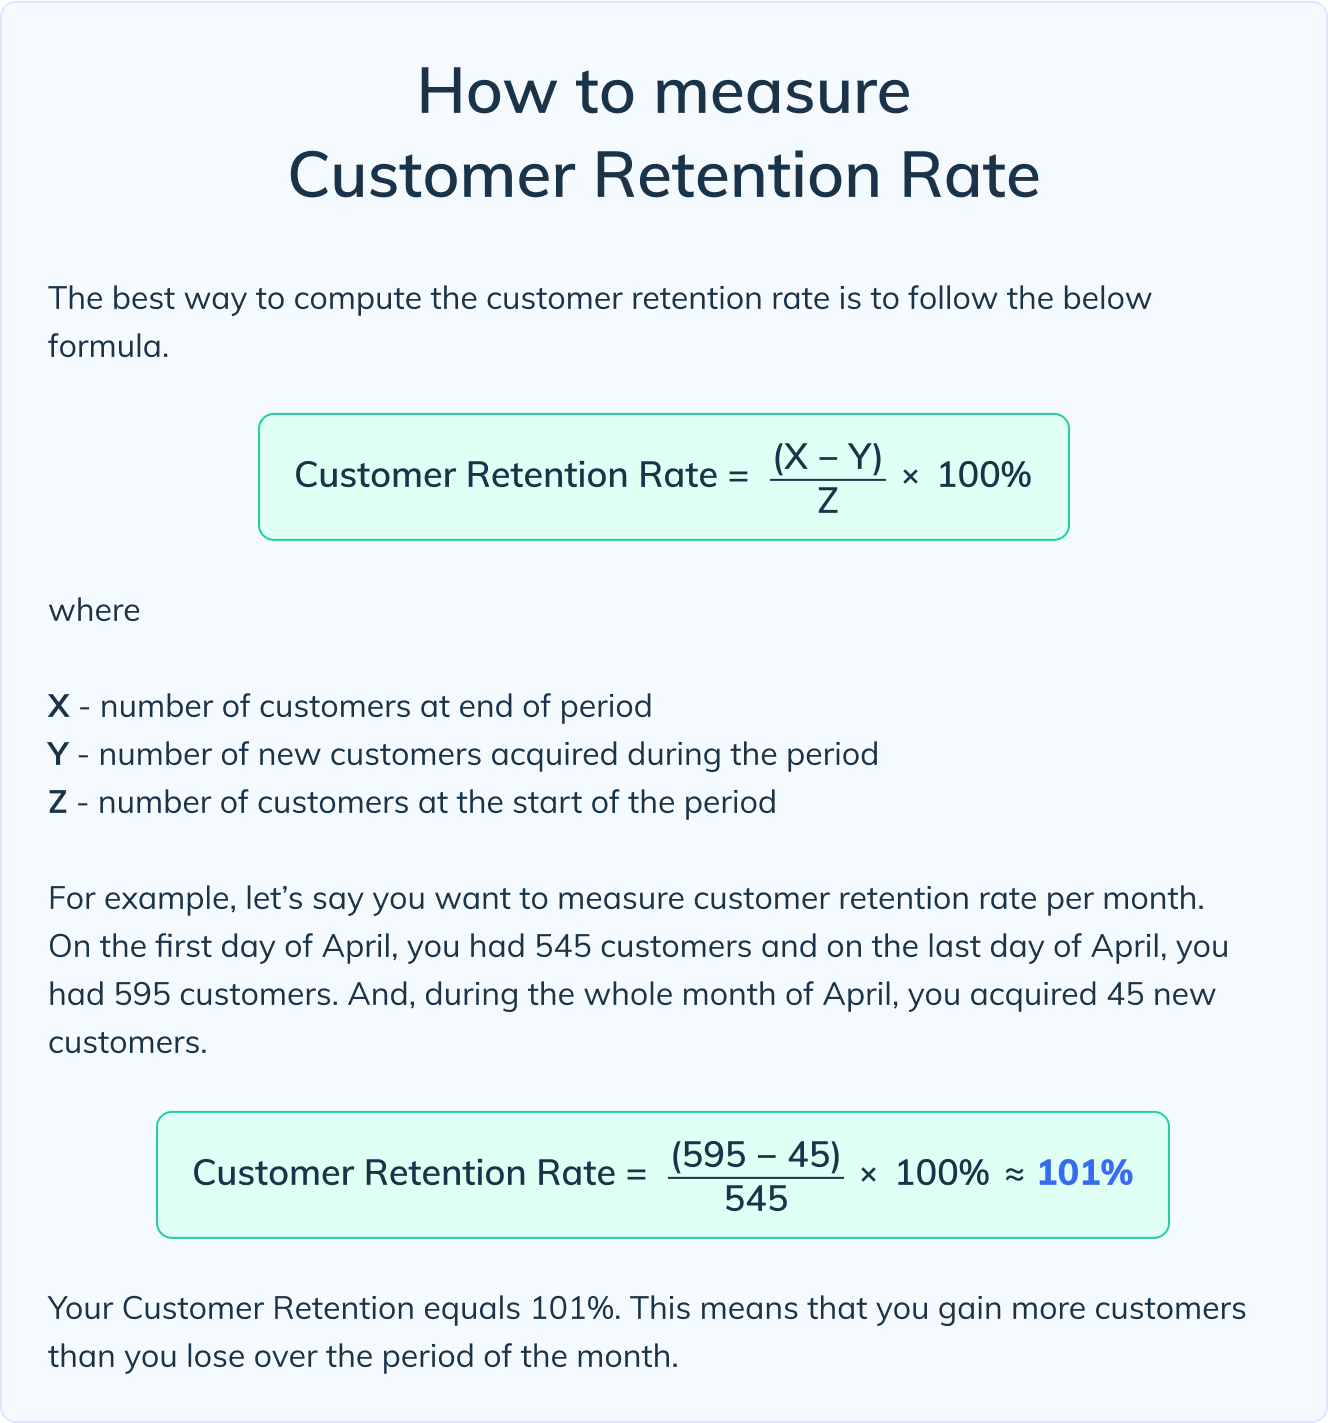 How to measure Customer Retention Rate